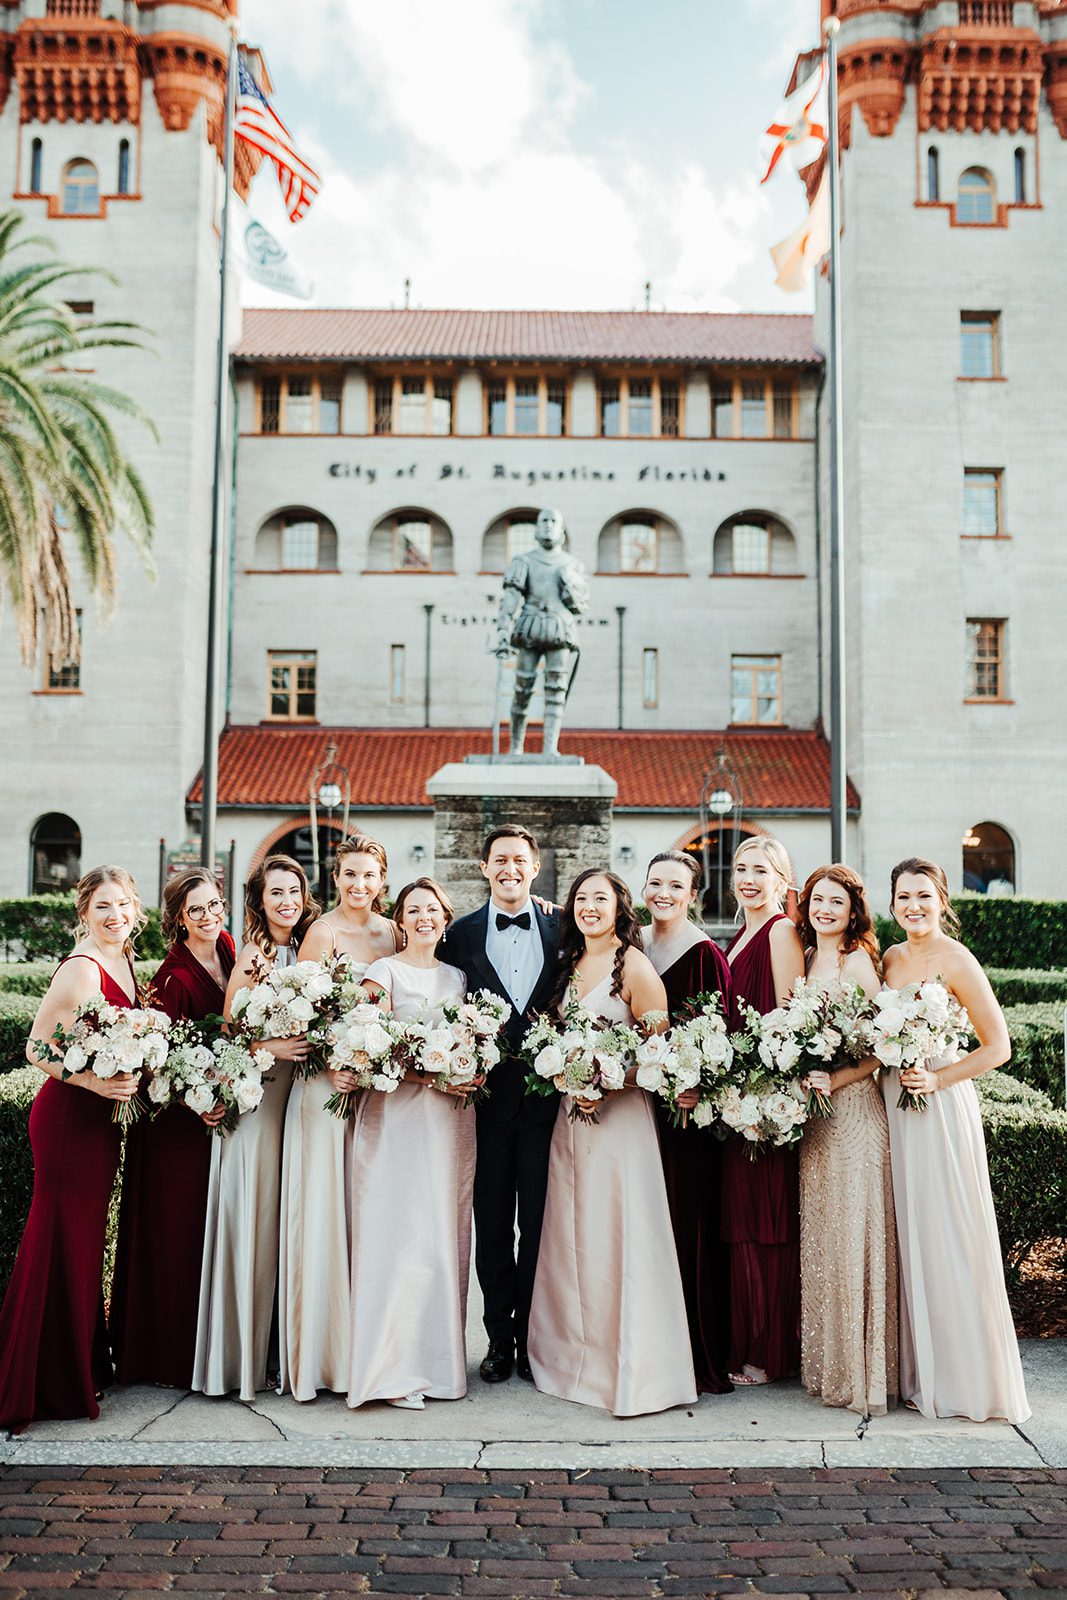 How To Choose Your Wedding Colors - Lightner Museum in St. Augustine,  Florida